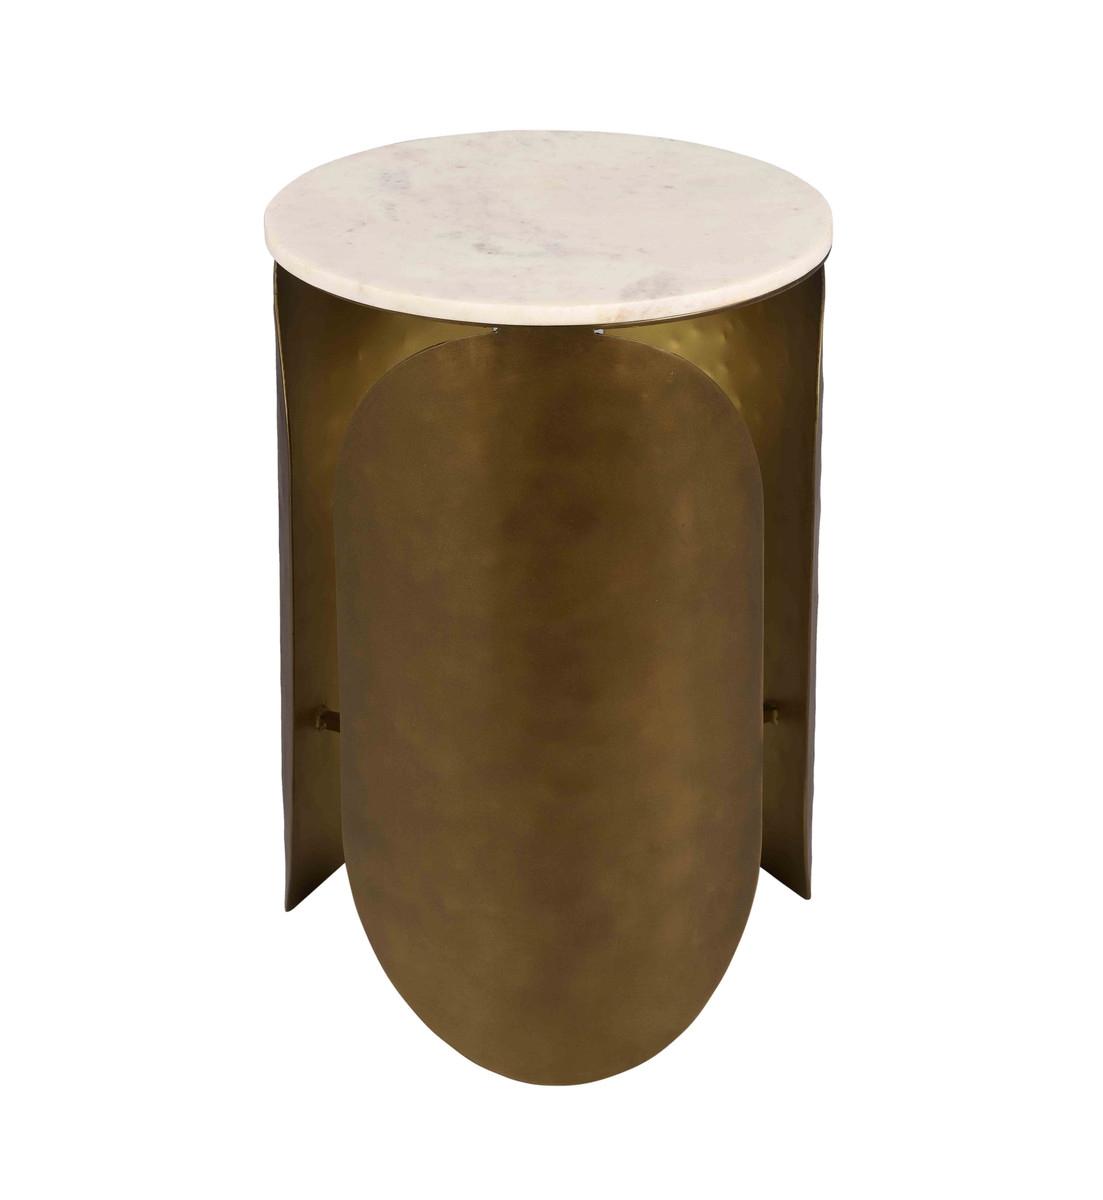 Indio White Marble Side Table - Image 4